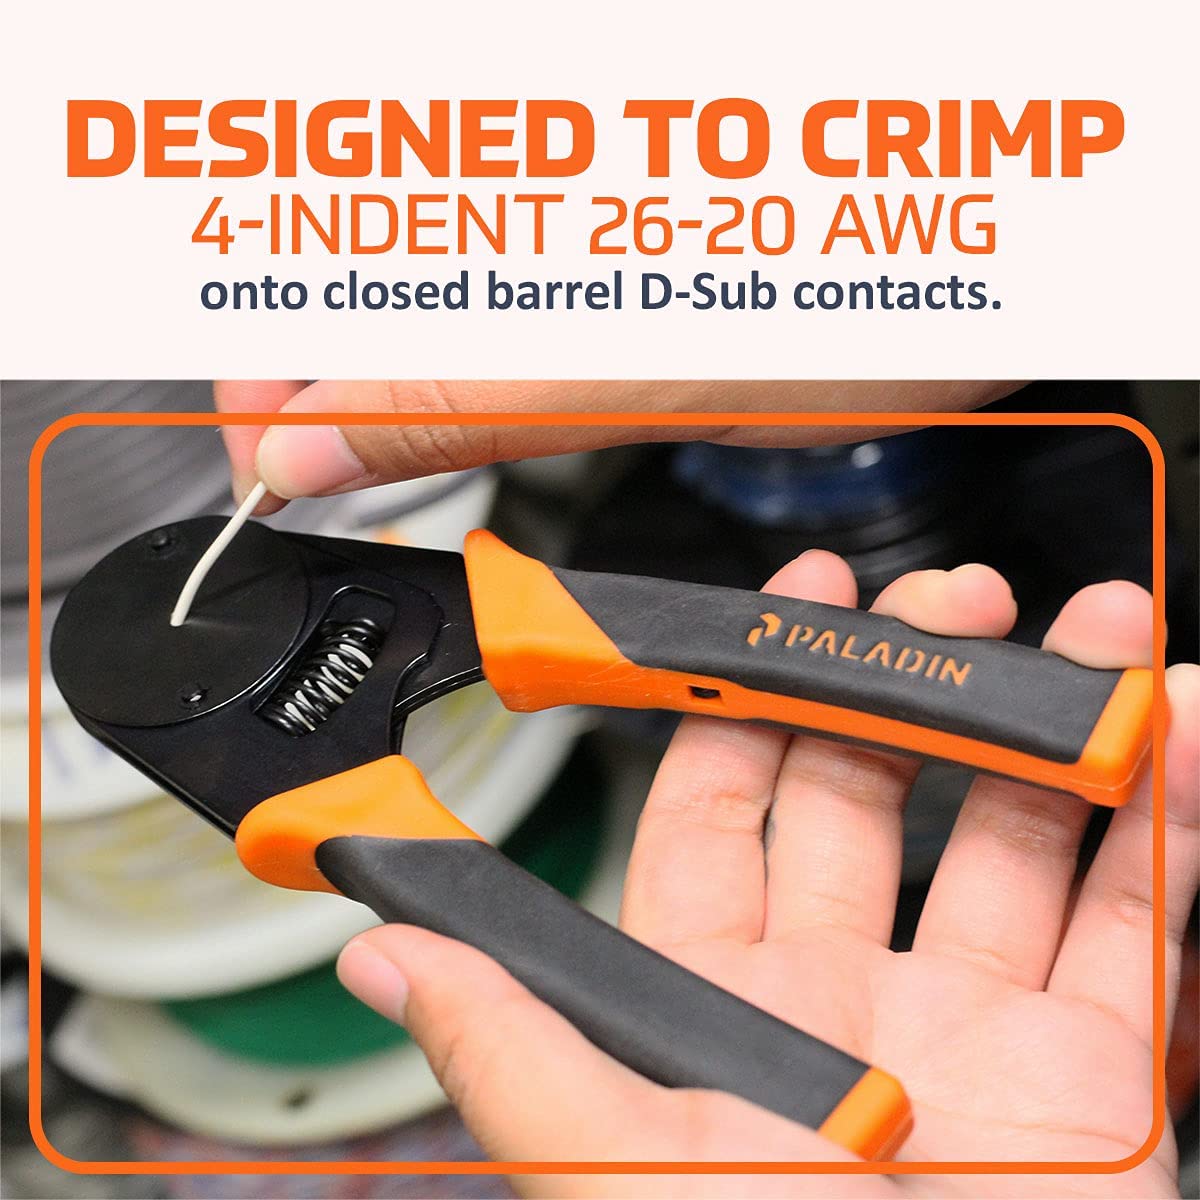 Paladin Tools D-sub 4 Indent Crimping Tool - image 2 of 6